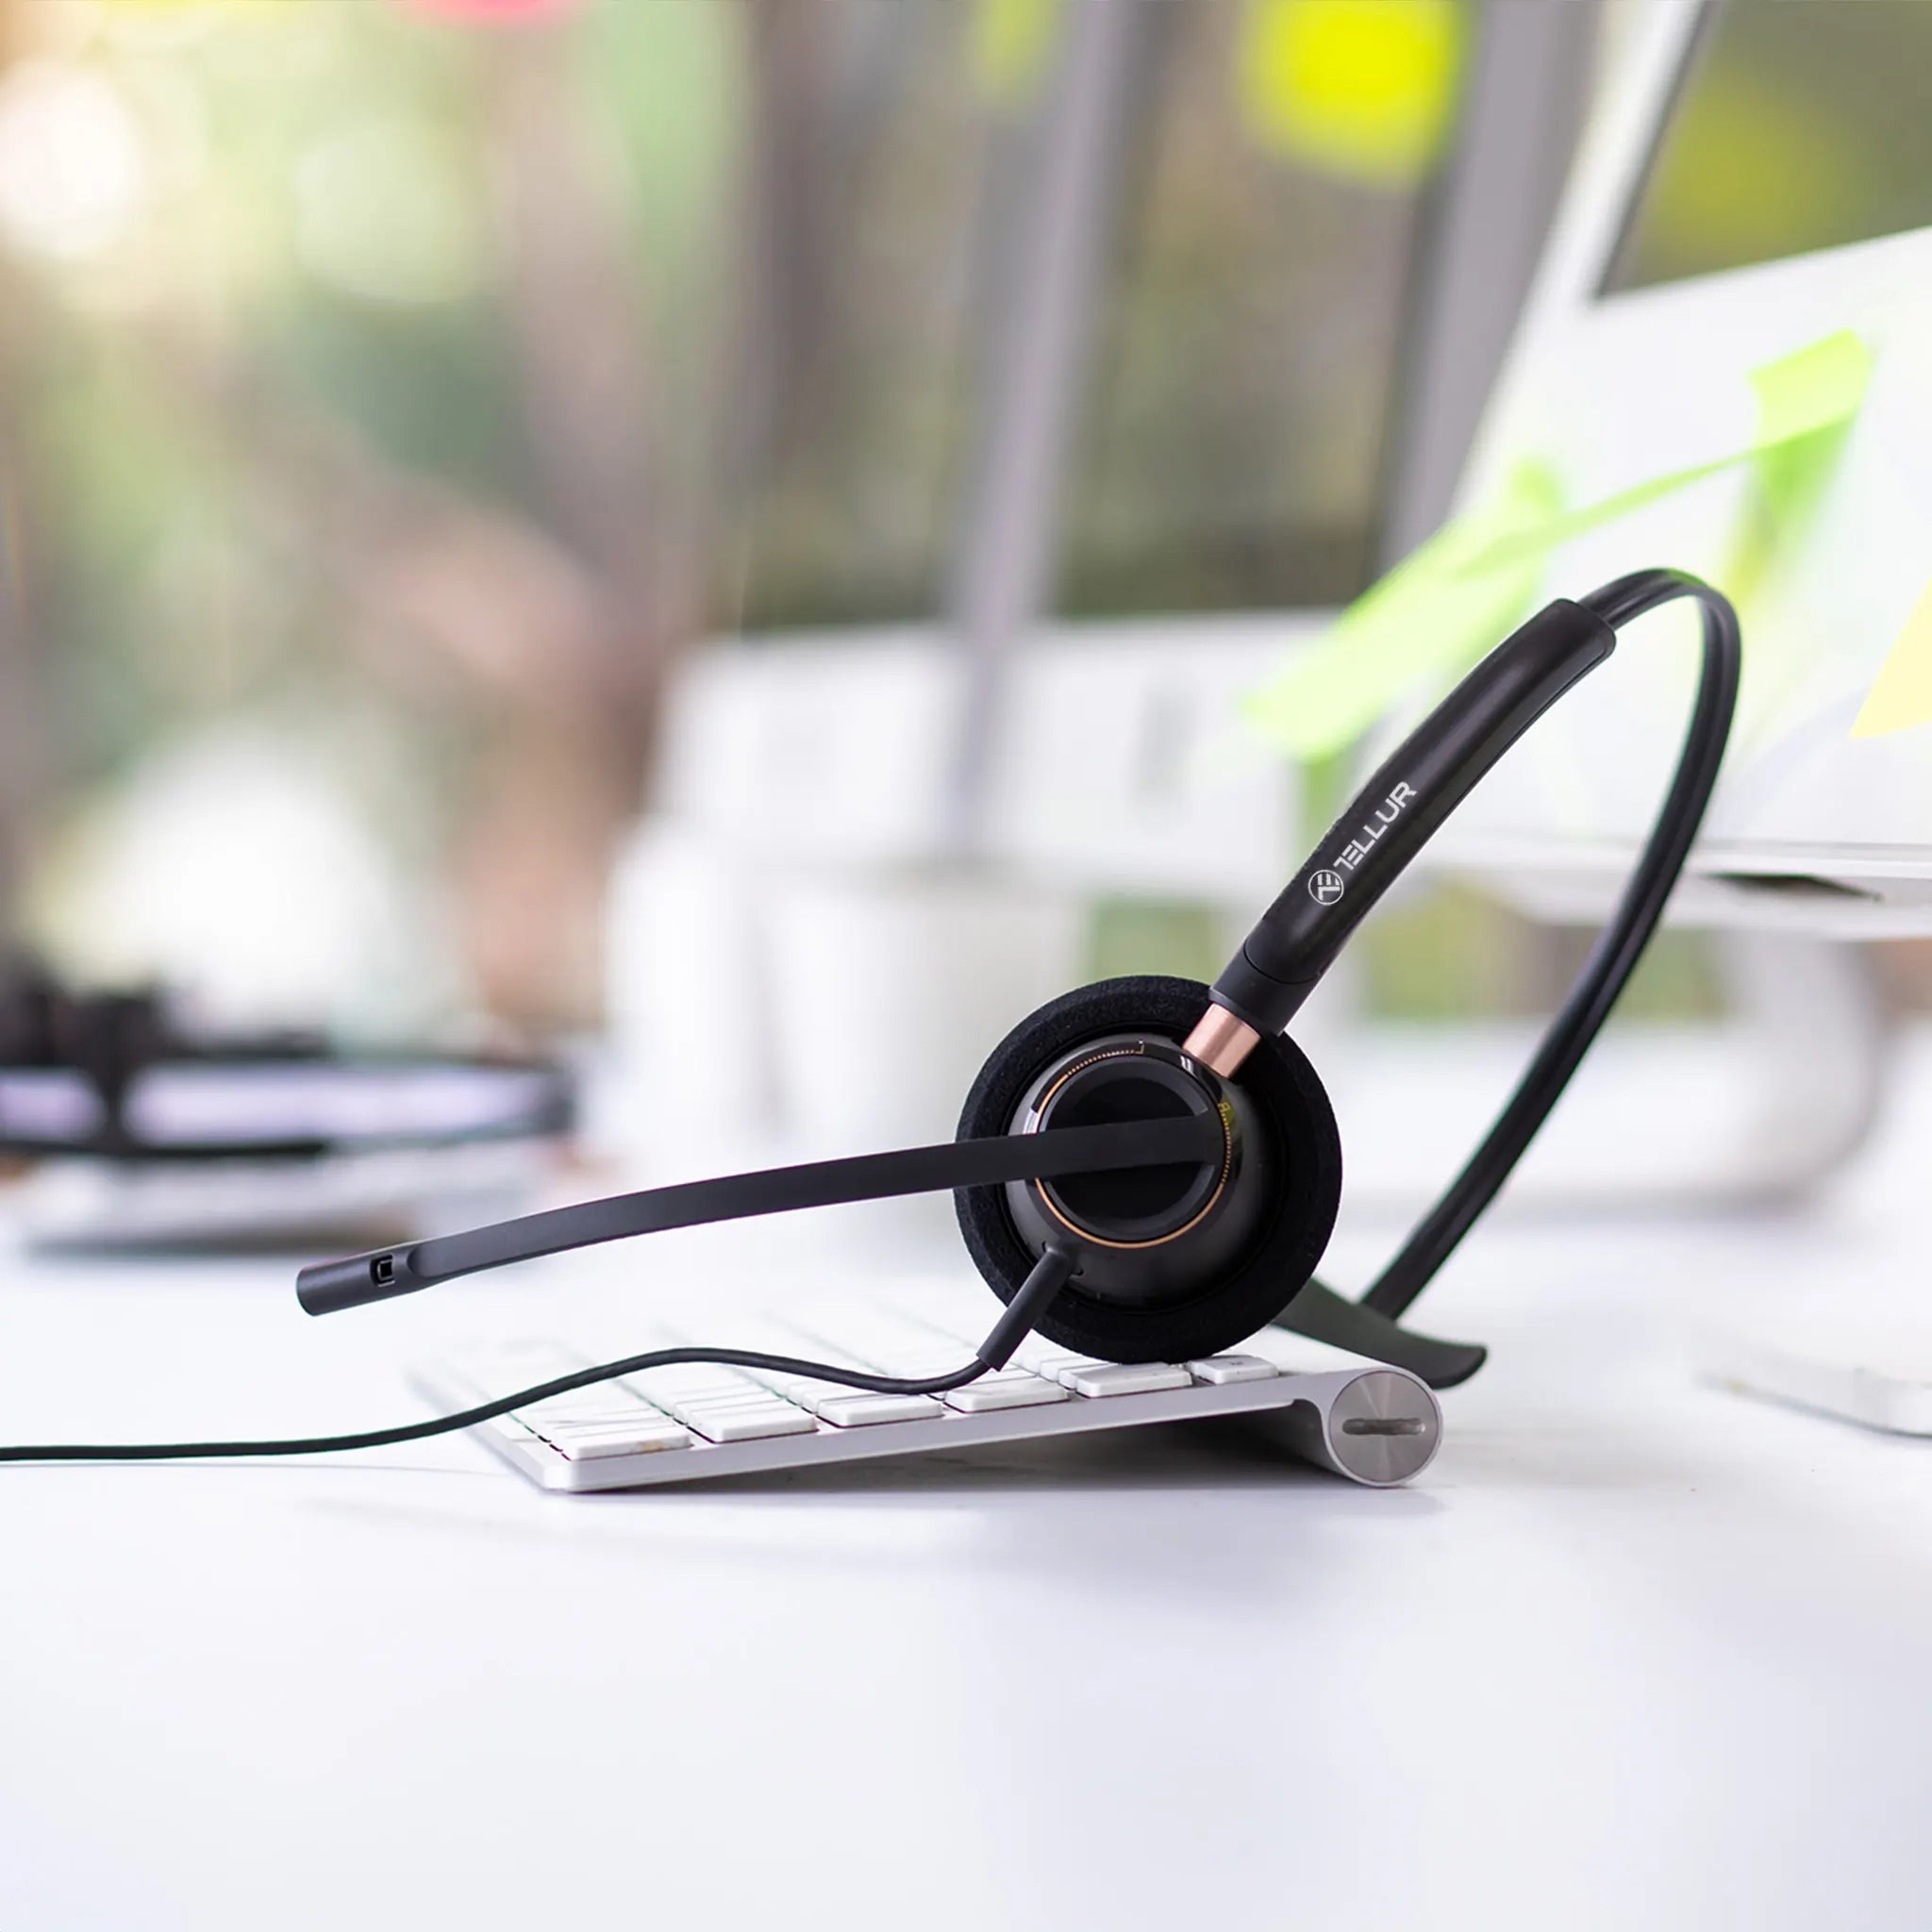 Professional call center headset on office desk